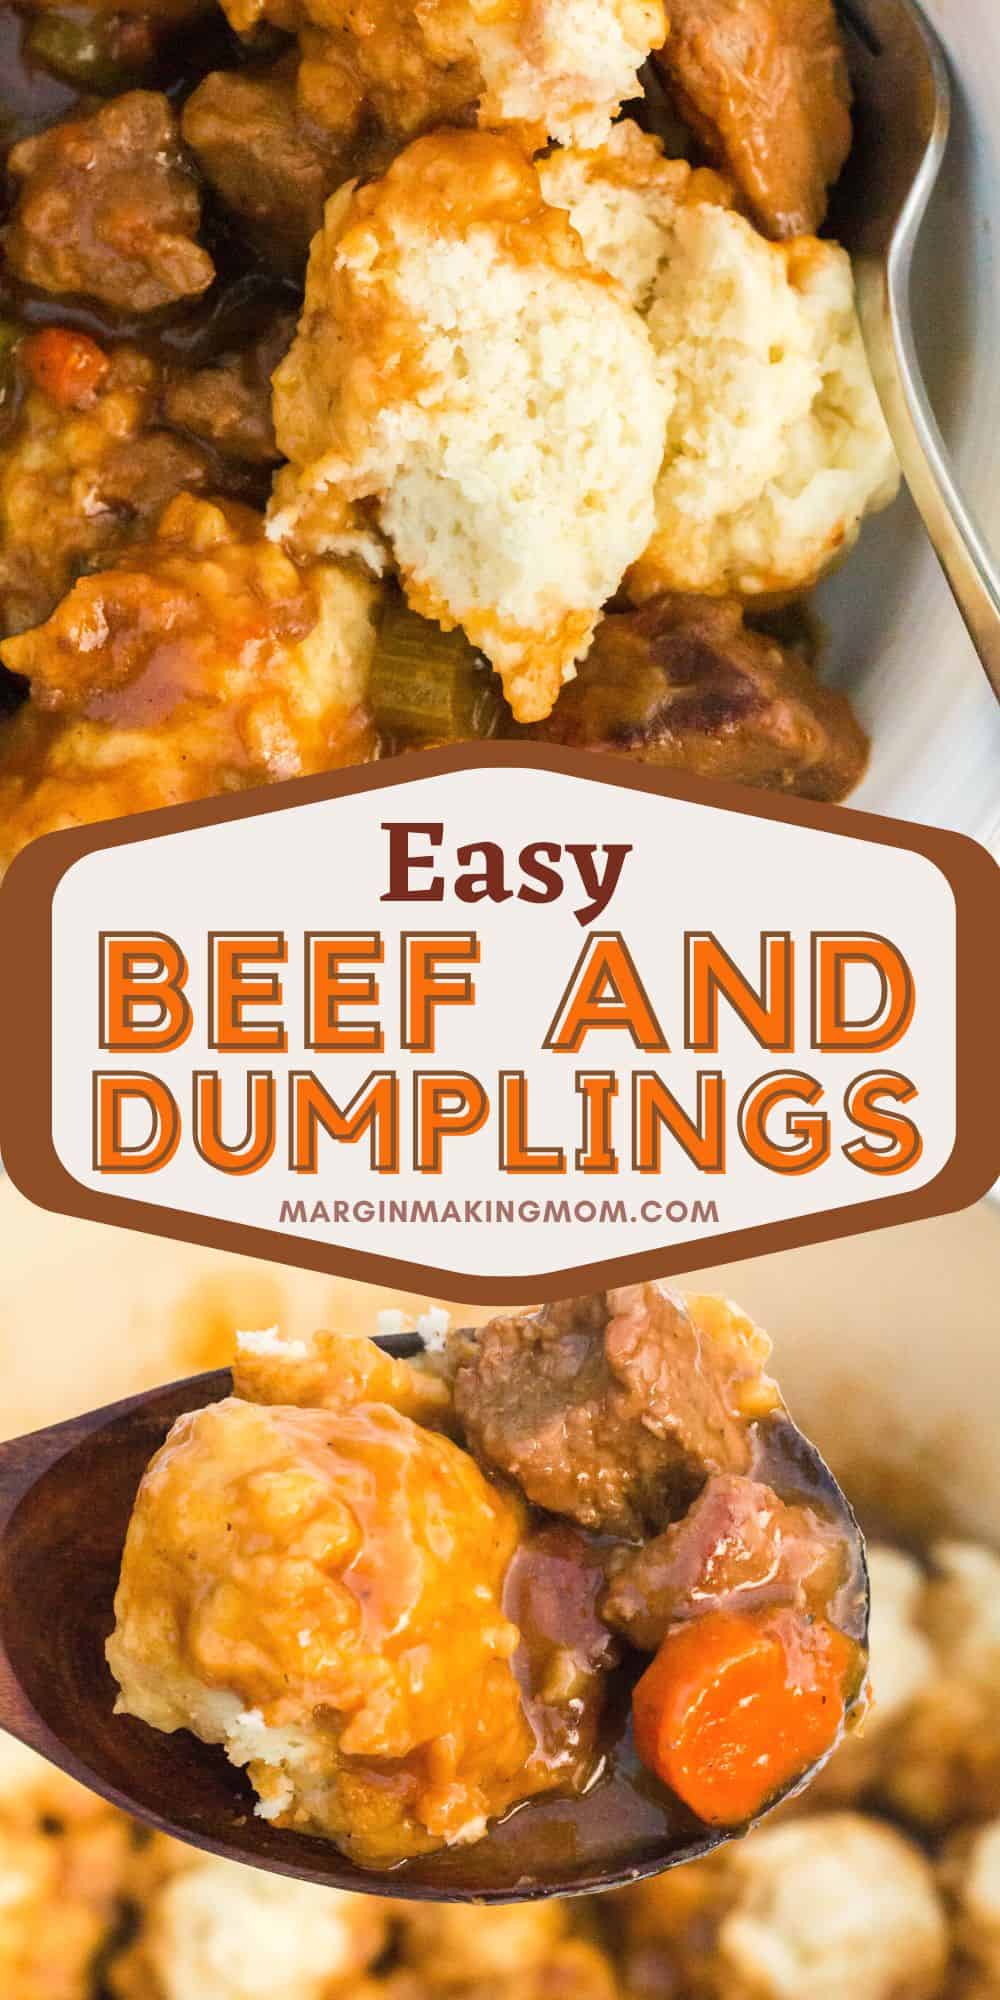 two photos; one shows beef and dumplings in a white bowl, with one dumpling torn open to show the fluffy inside. The other photos shows a serving spoon scooping out beef stew and dumplings from a dutch oven.